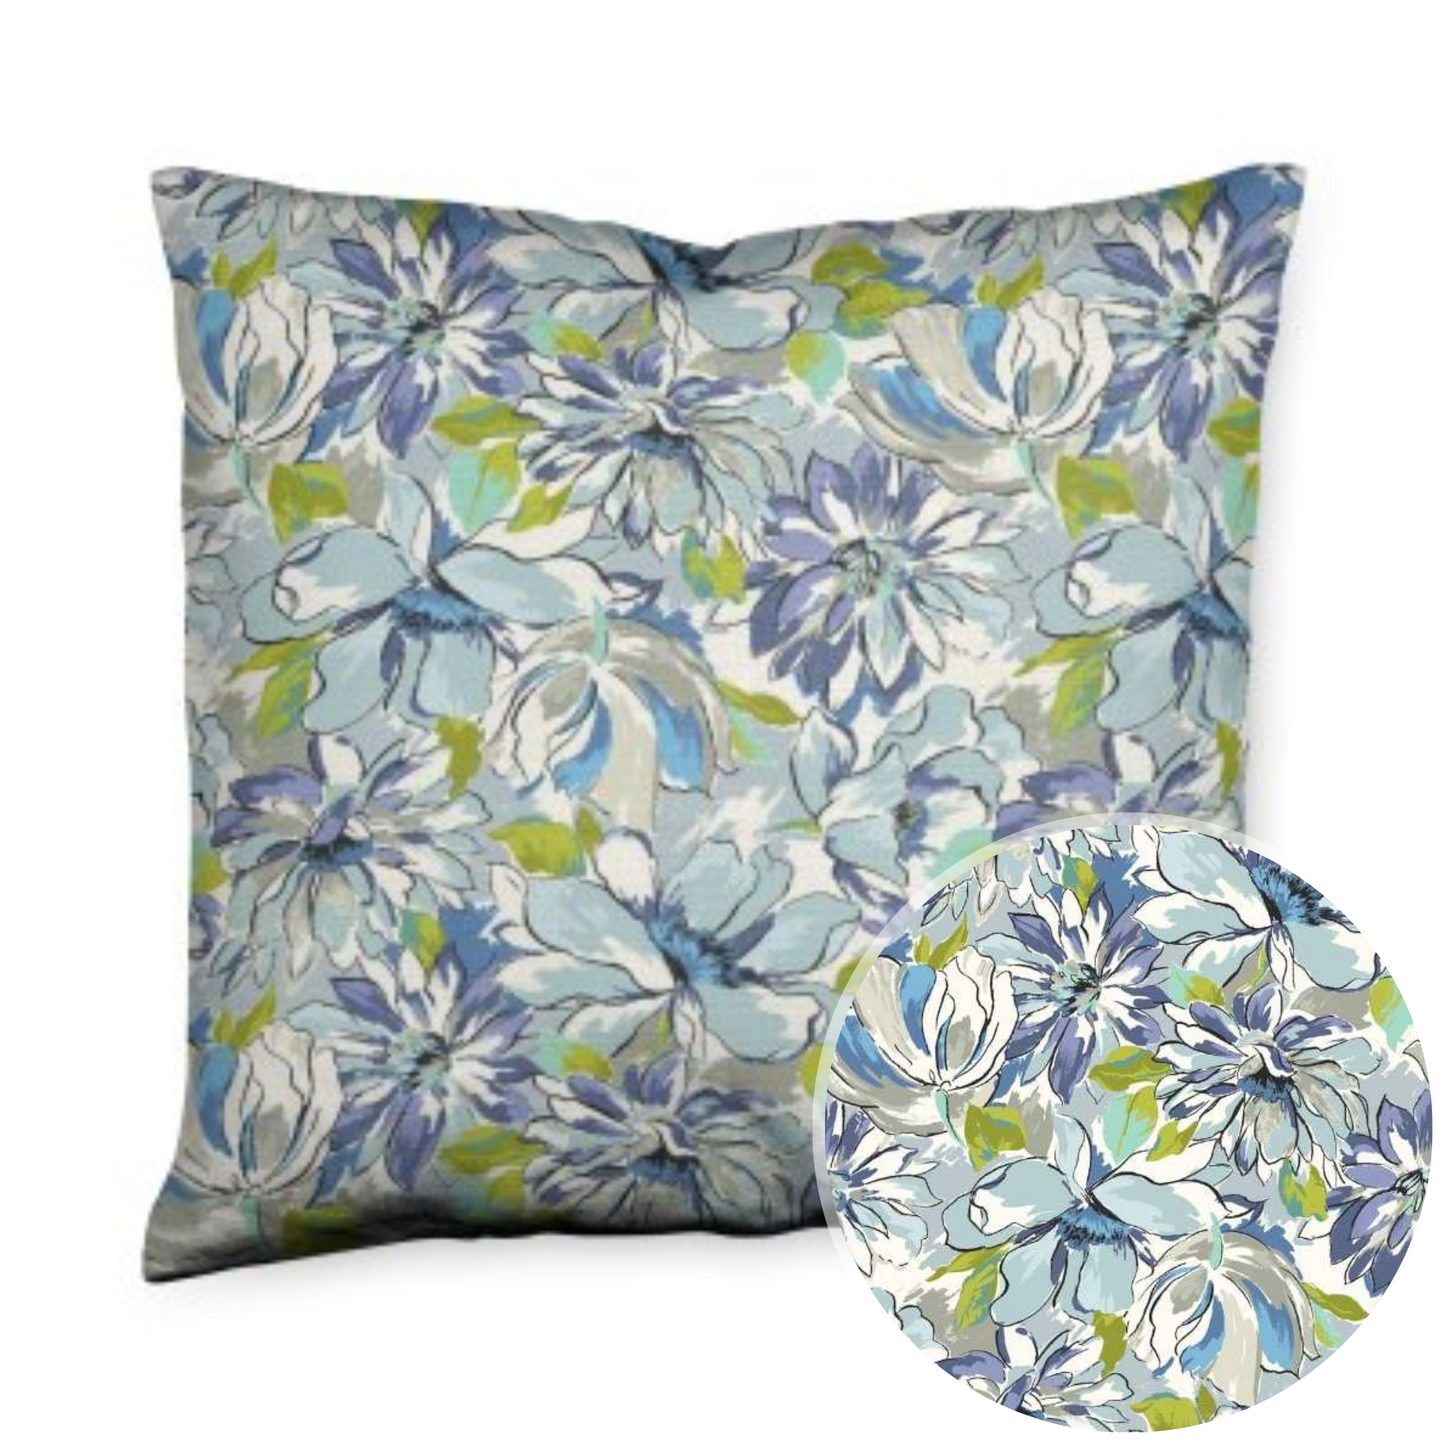 Painterly Floral Green Throw Pillow